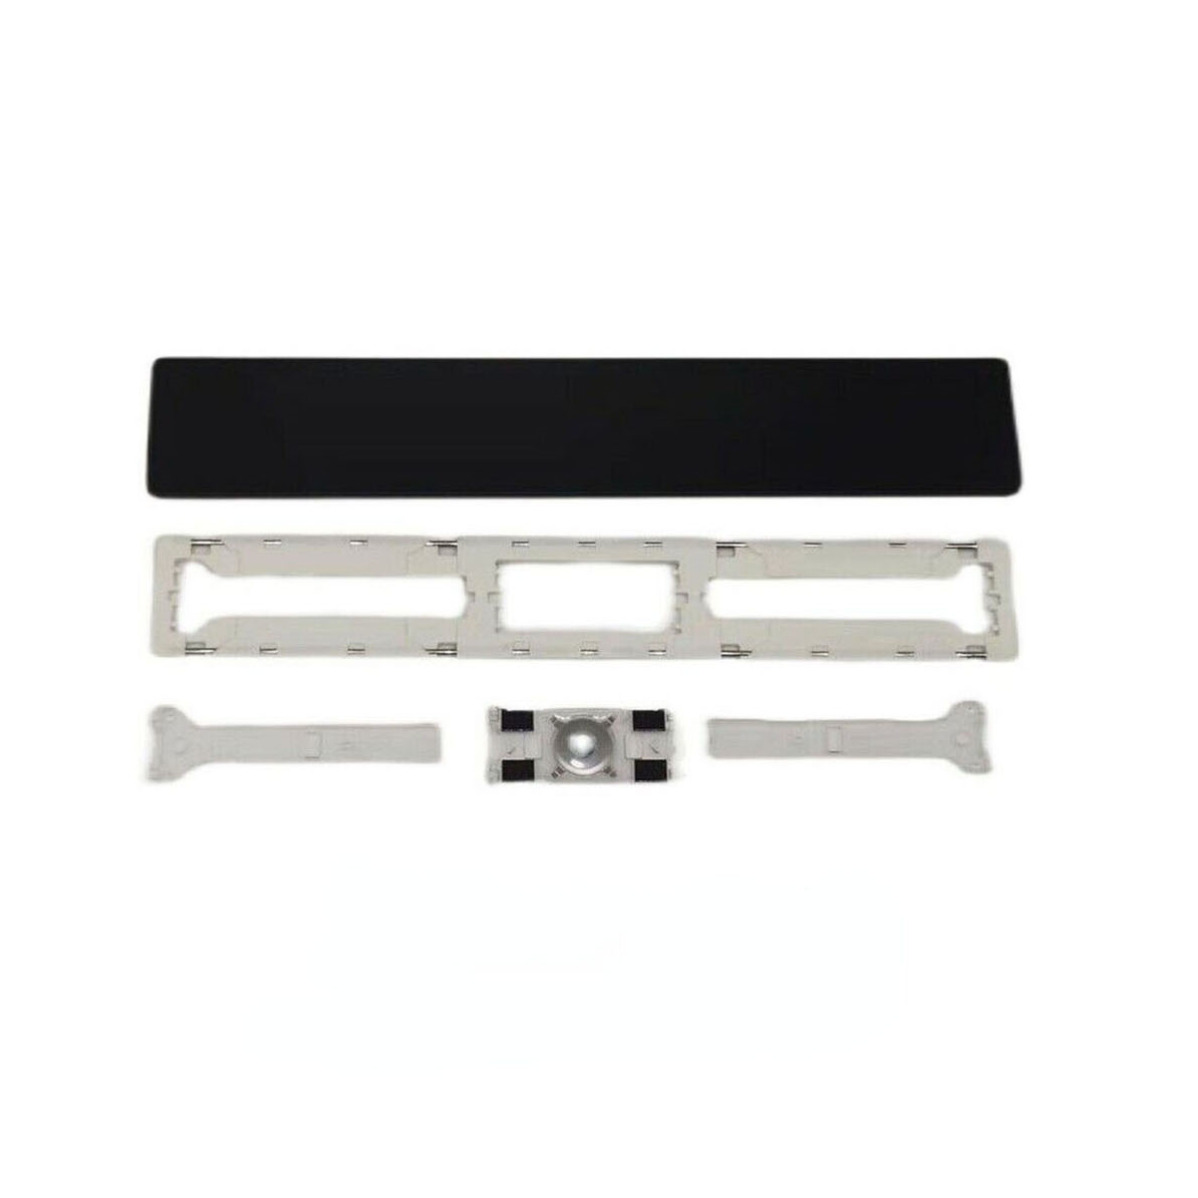 Space Bar Keyboard Key Clips For Macbook Pro 13\